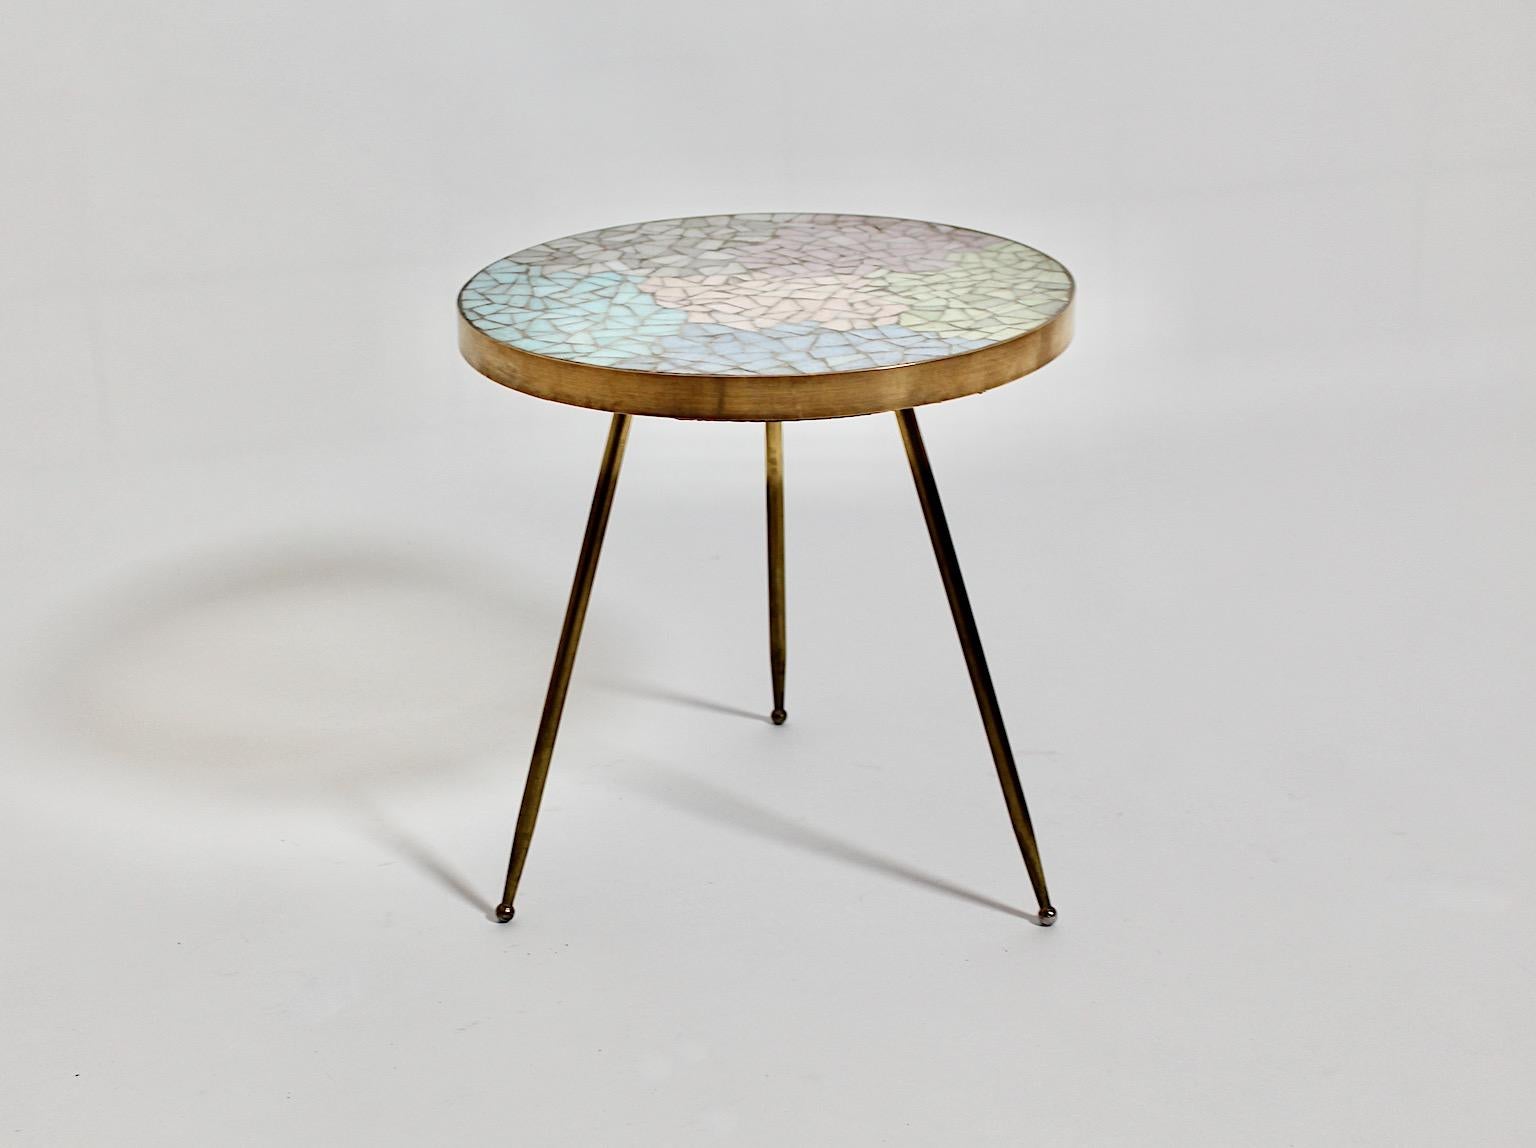 Mid Century Modern vintage circular small side table or flower table from brass and pastel colored mosaic elements 1950s Italy.
An amazing side table with brass base with three legs and a brass trim framed the top showing a pastel colored mosaic